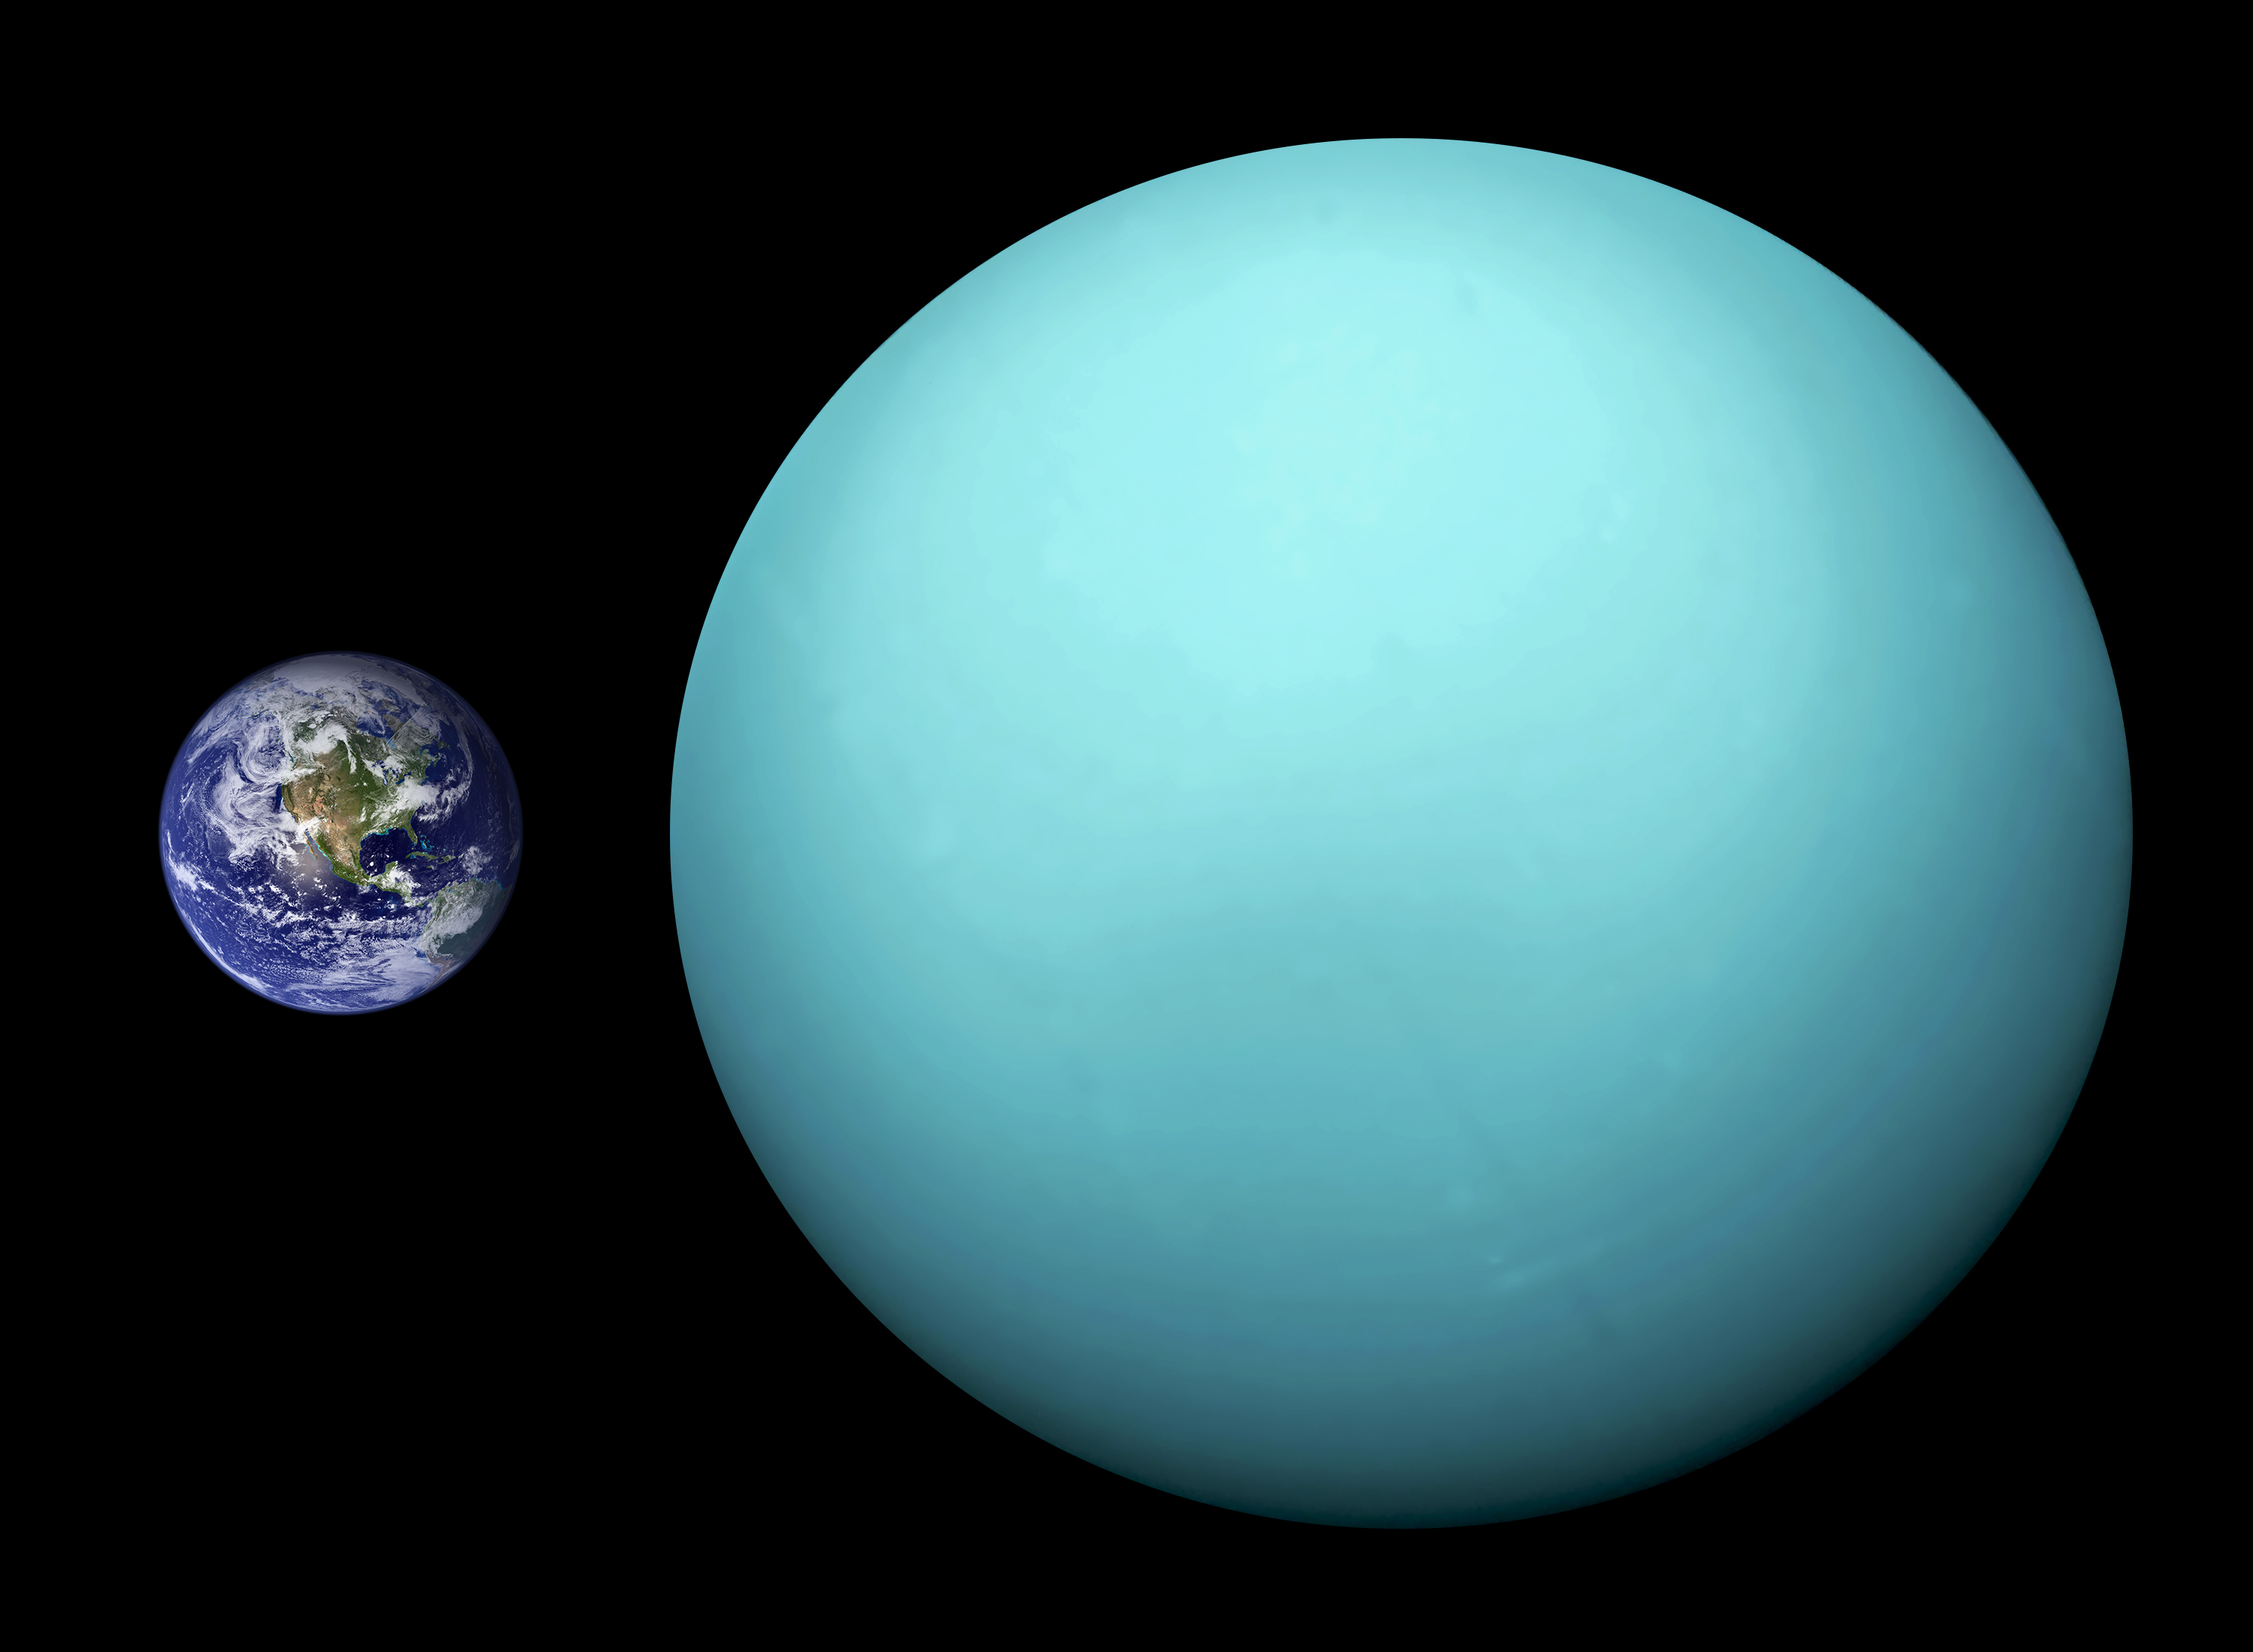 The Uranus planet is even more weird than was thought